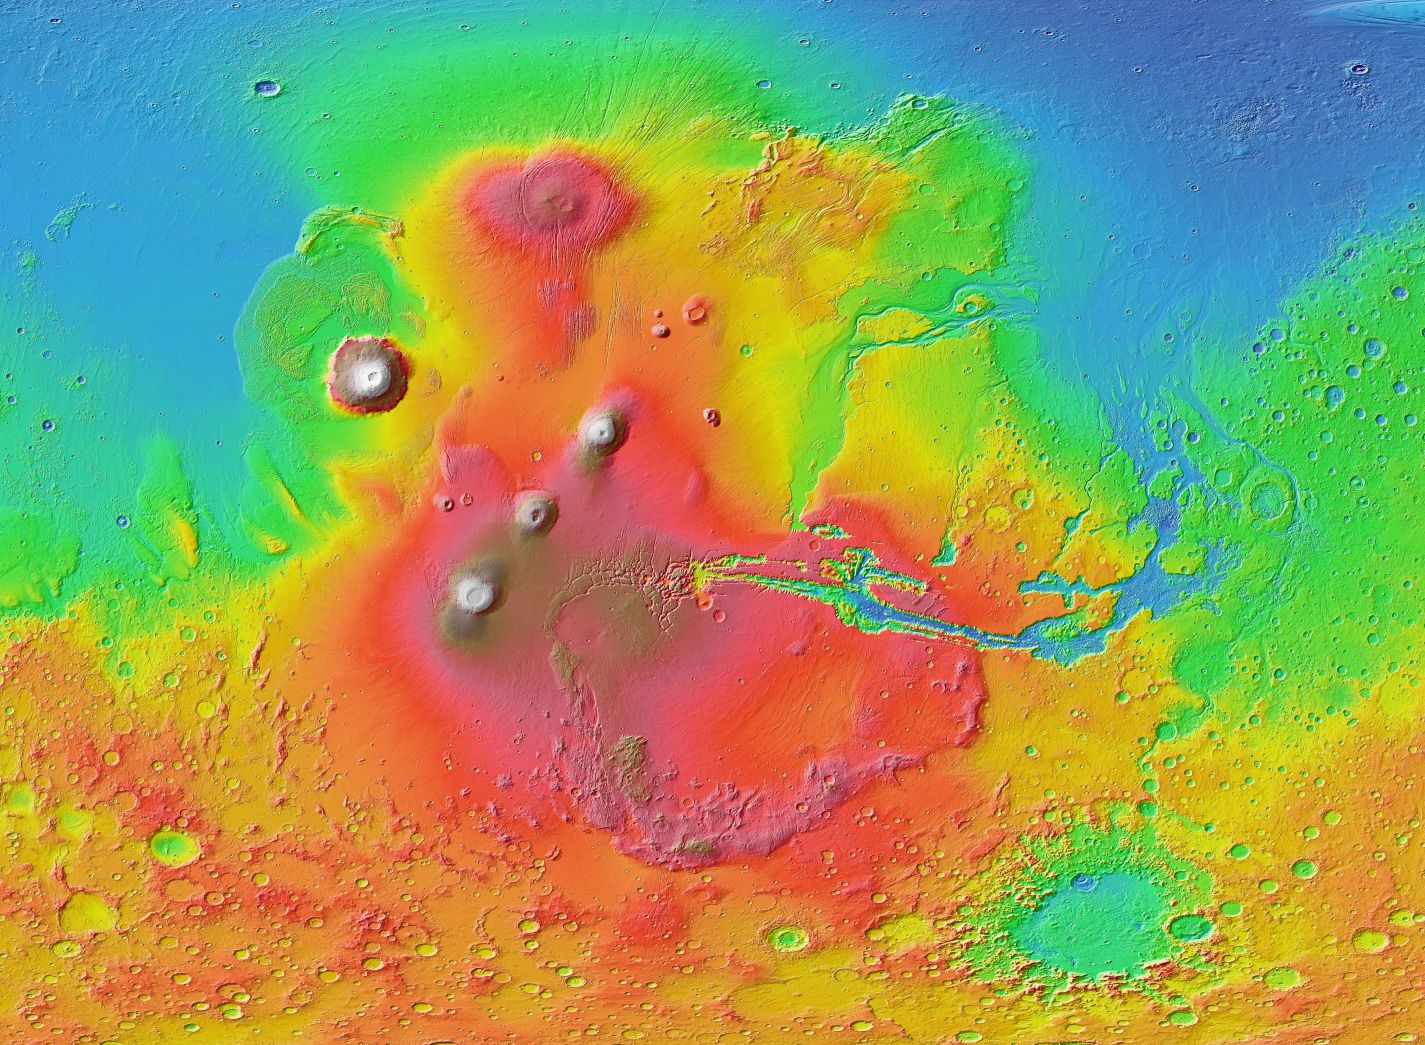 A false-color relief map of the Tharsis region made from the Mars Orbiter Laser Altimeter onboard NASA's Mars Global Surveyor spacecraft. The Tharsis Montes are the three aligned volcanoes left of center. Olympus Mons sits off to the northwest. The oval feature in the north is Alba Mons. The canyon system Valles Marineris stretches eastward from Tharsis; from its vicinity, outflow channels that once carried floodwaters extend north. Image Credit/Caption: Wikipedia